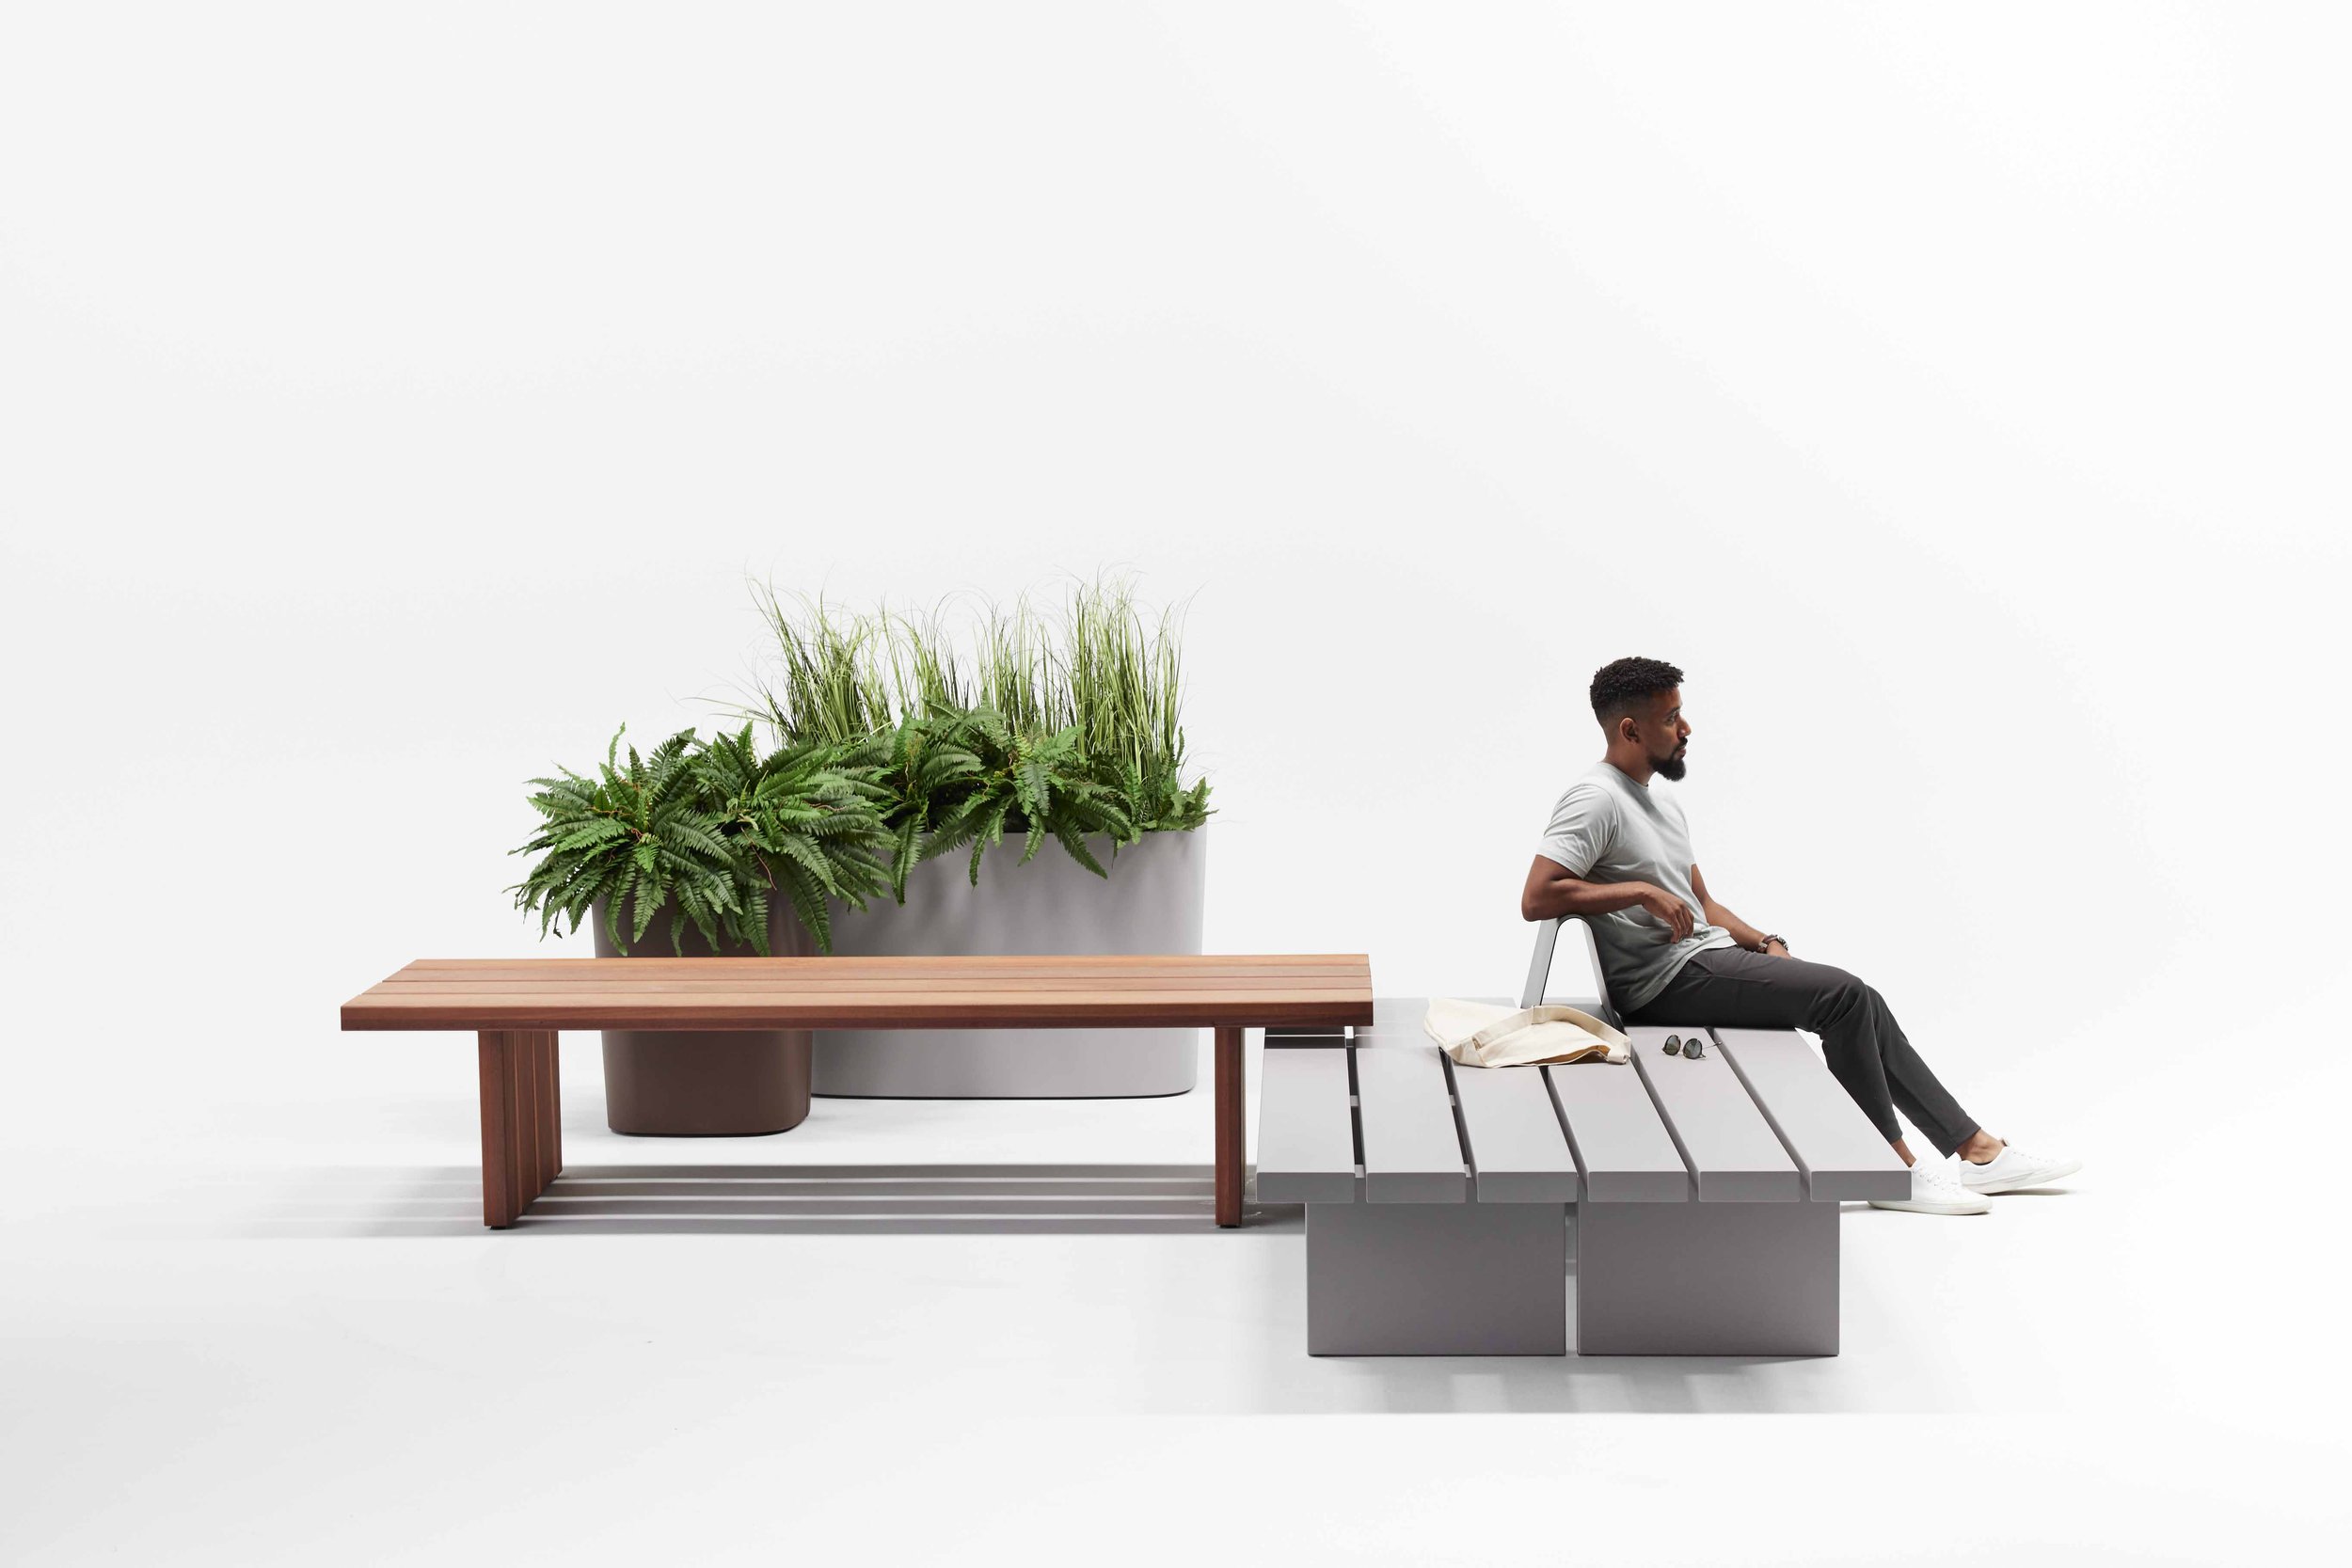 Landscape Forms and Industrial Facility Introduce Plains & Pods — Two Complementary Products Inspiring Flexible, Multi-Functional Space Design